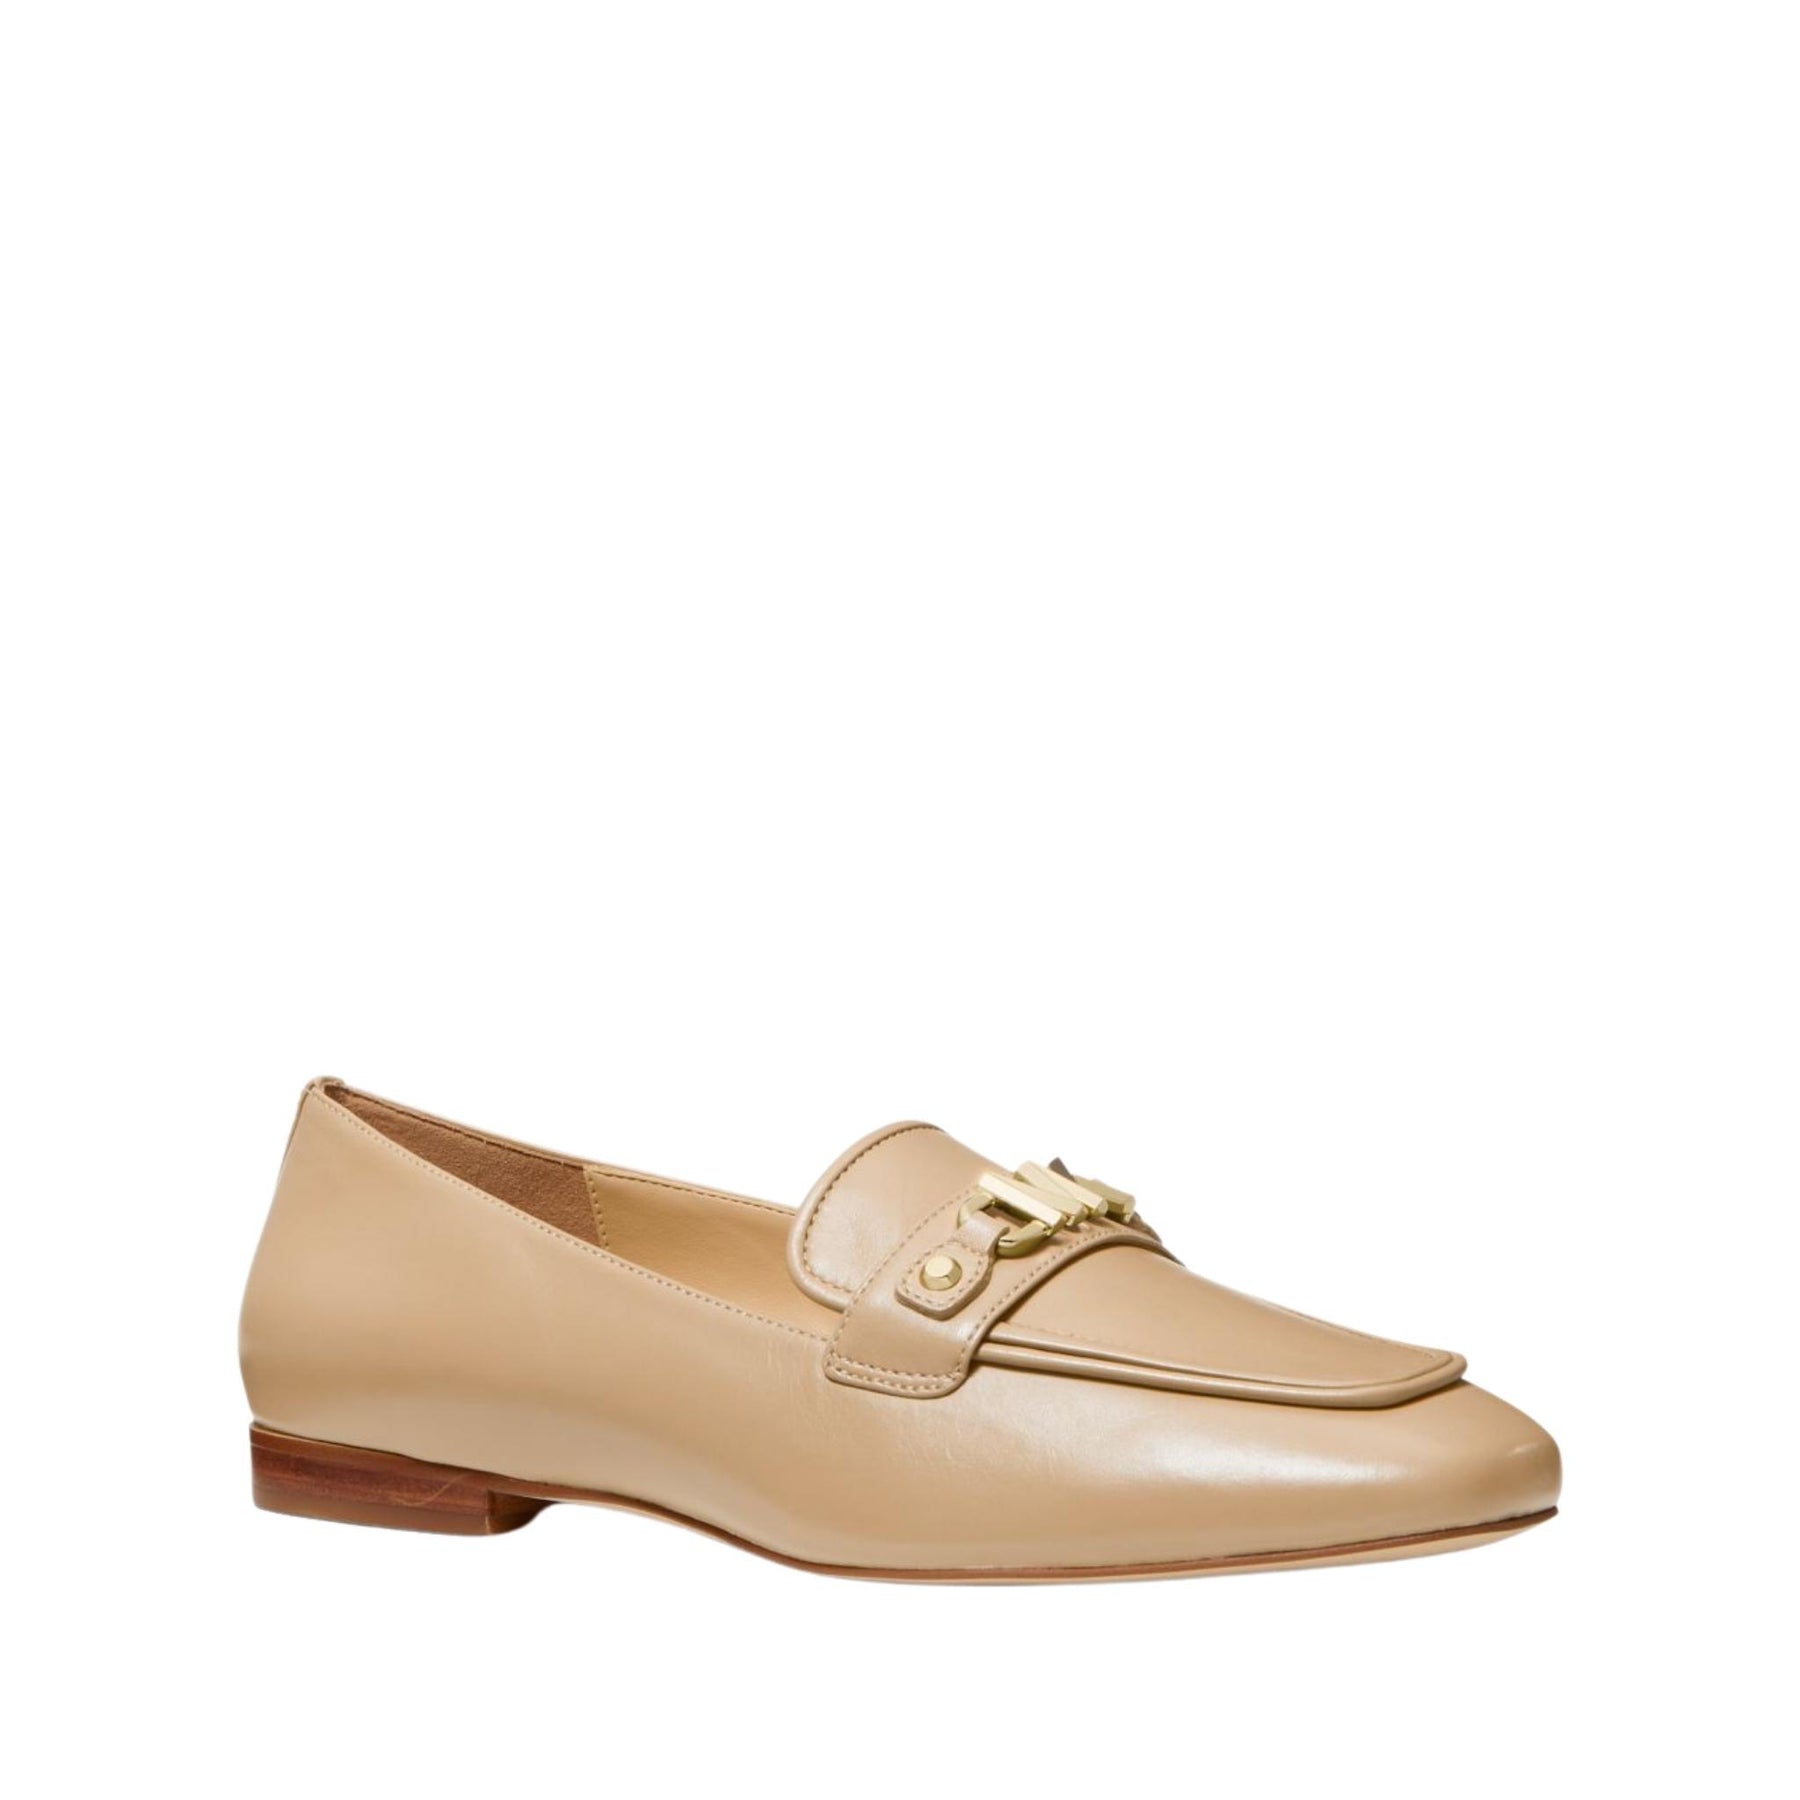 Women's leather moccasins with square toe - Michael Kors | Old England